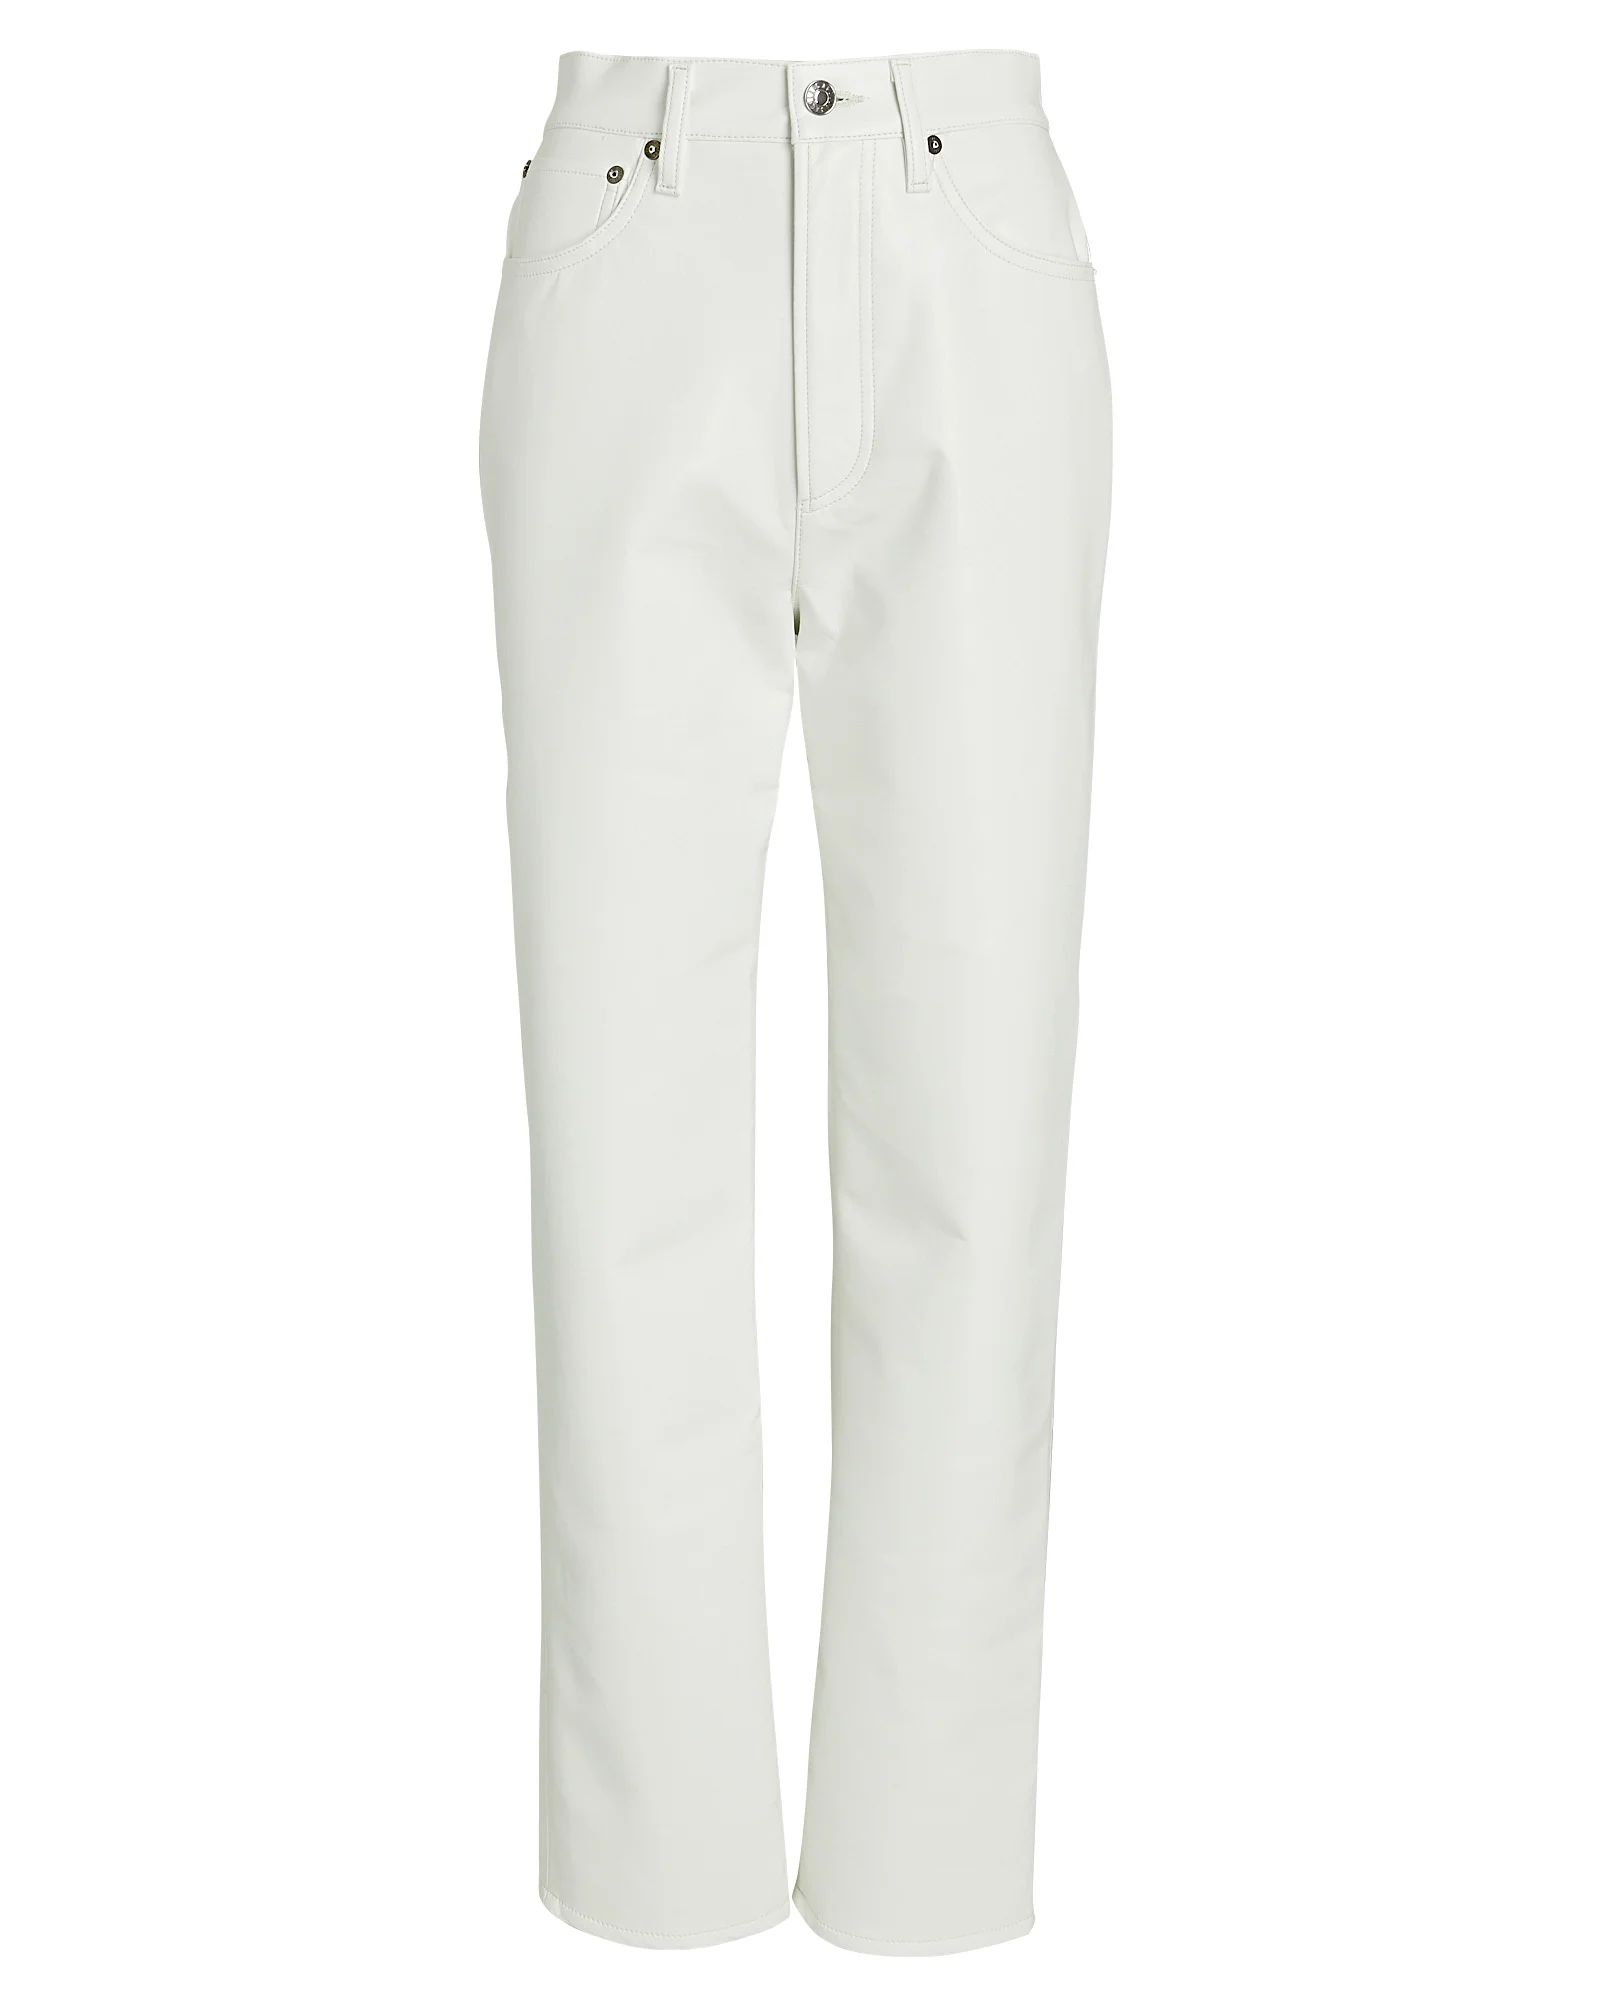 AGOLDE 90s Pinch Waist Recycled Leather Jeans, White 23 | INTERMIX